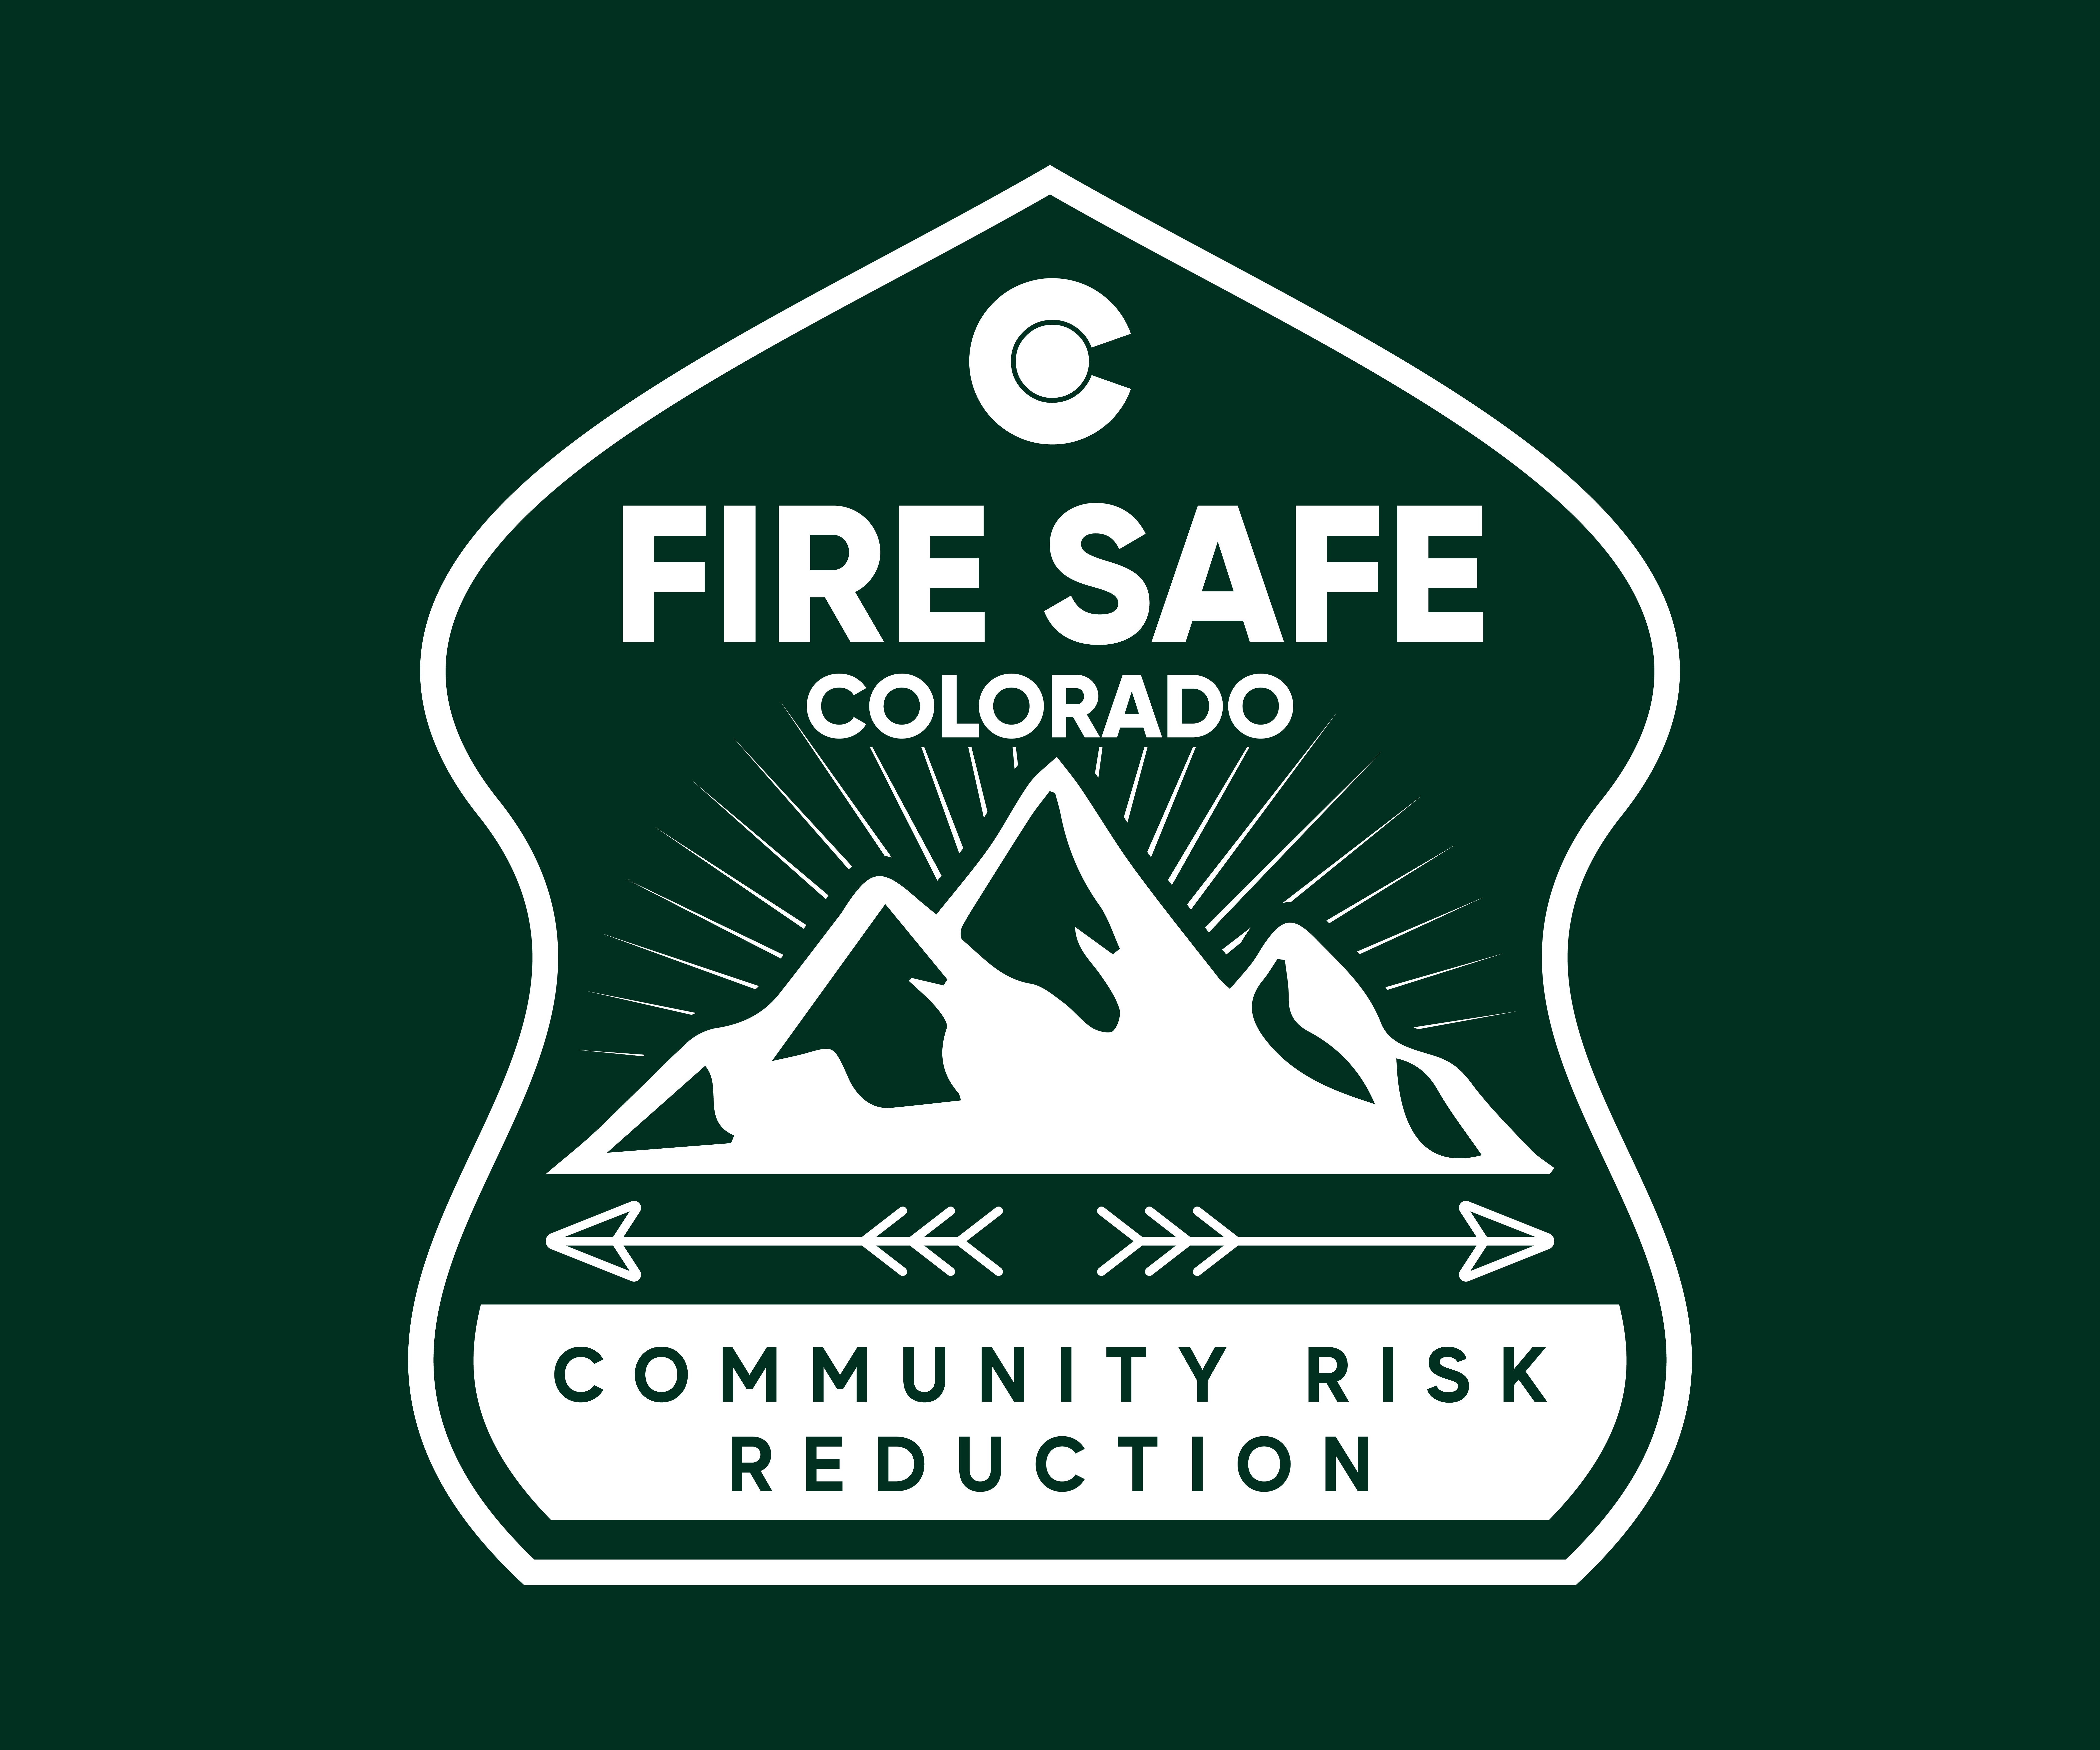 Fire Safe Colorado Logo - Dark Green Color, Mountains and arrows over the words "Community Risk Reduction" 